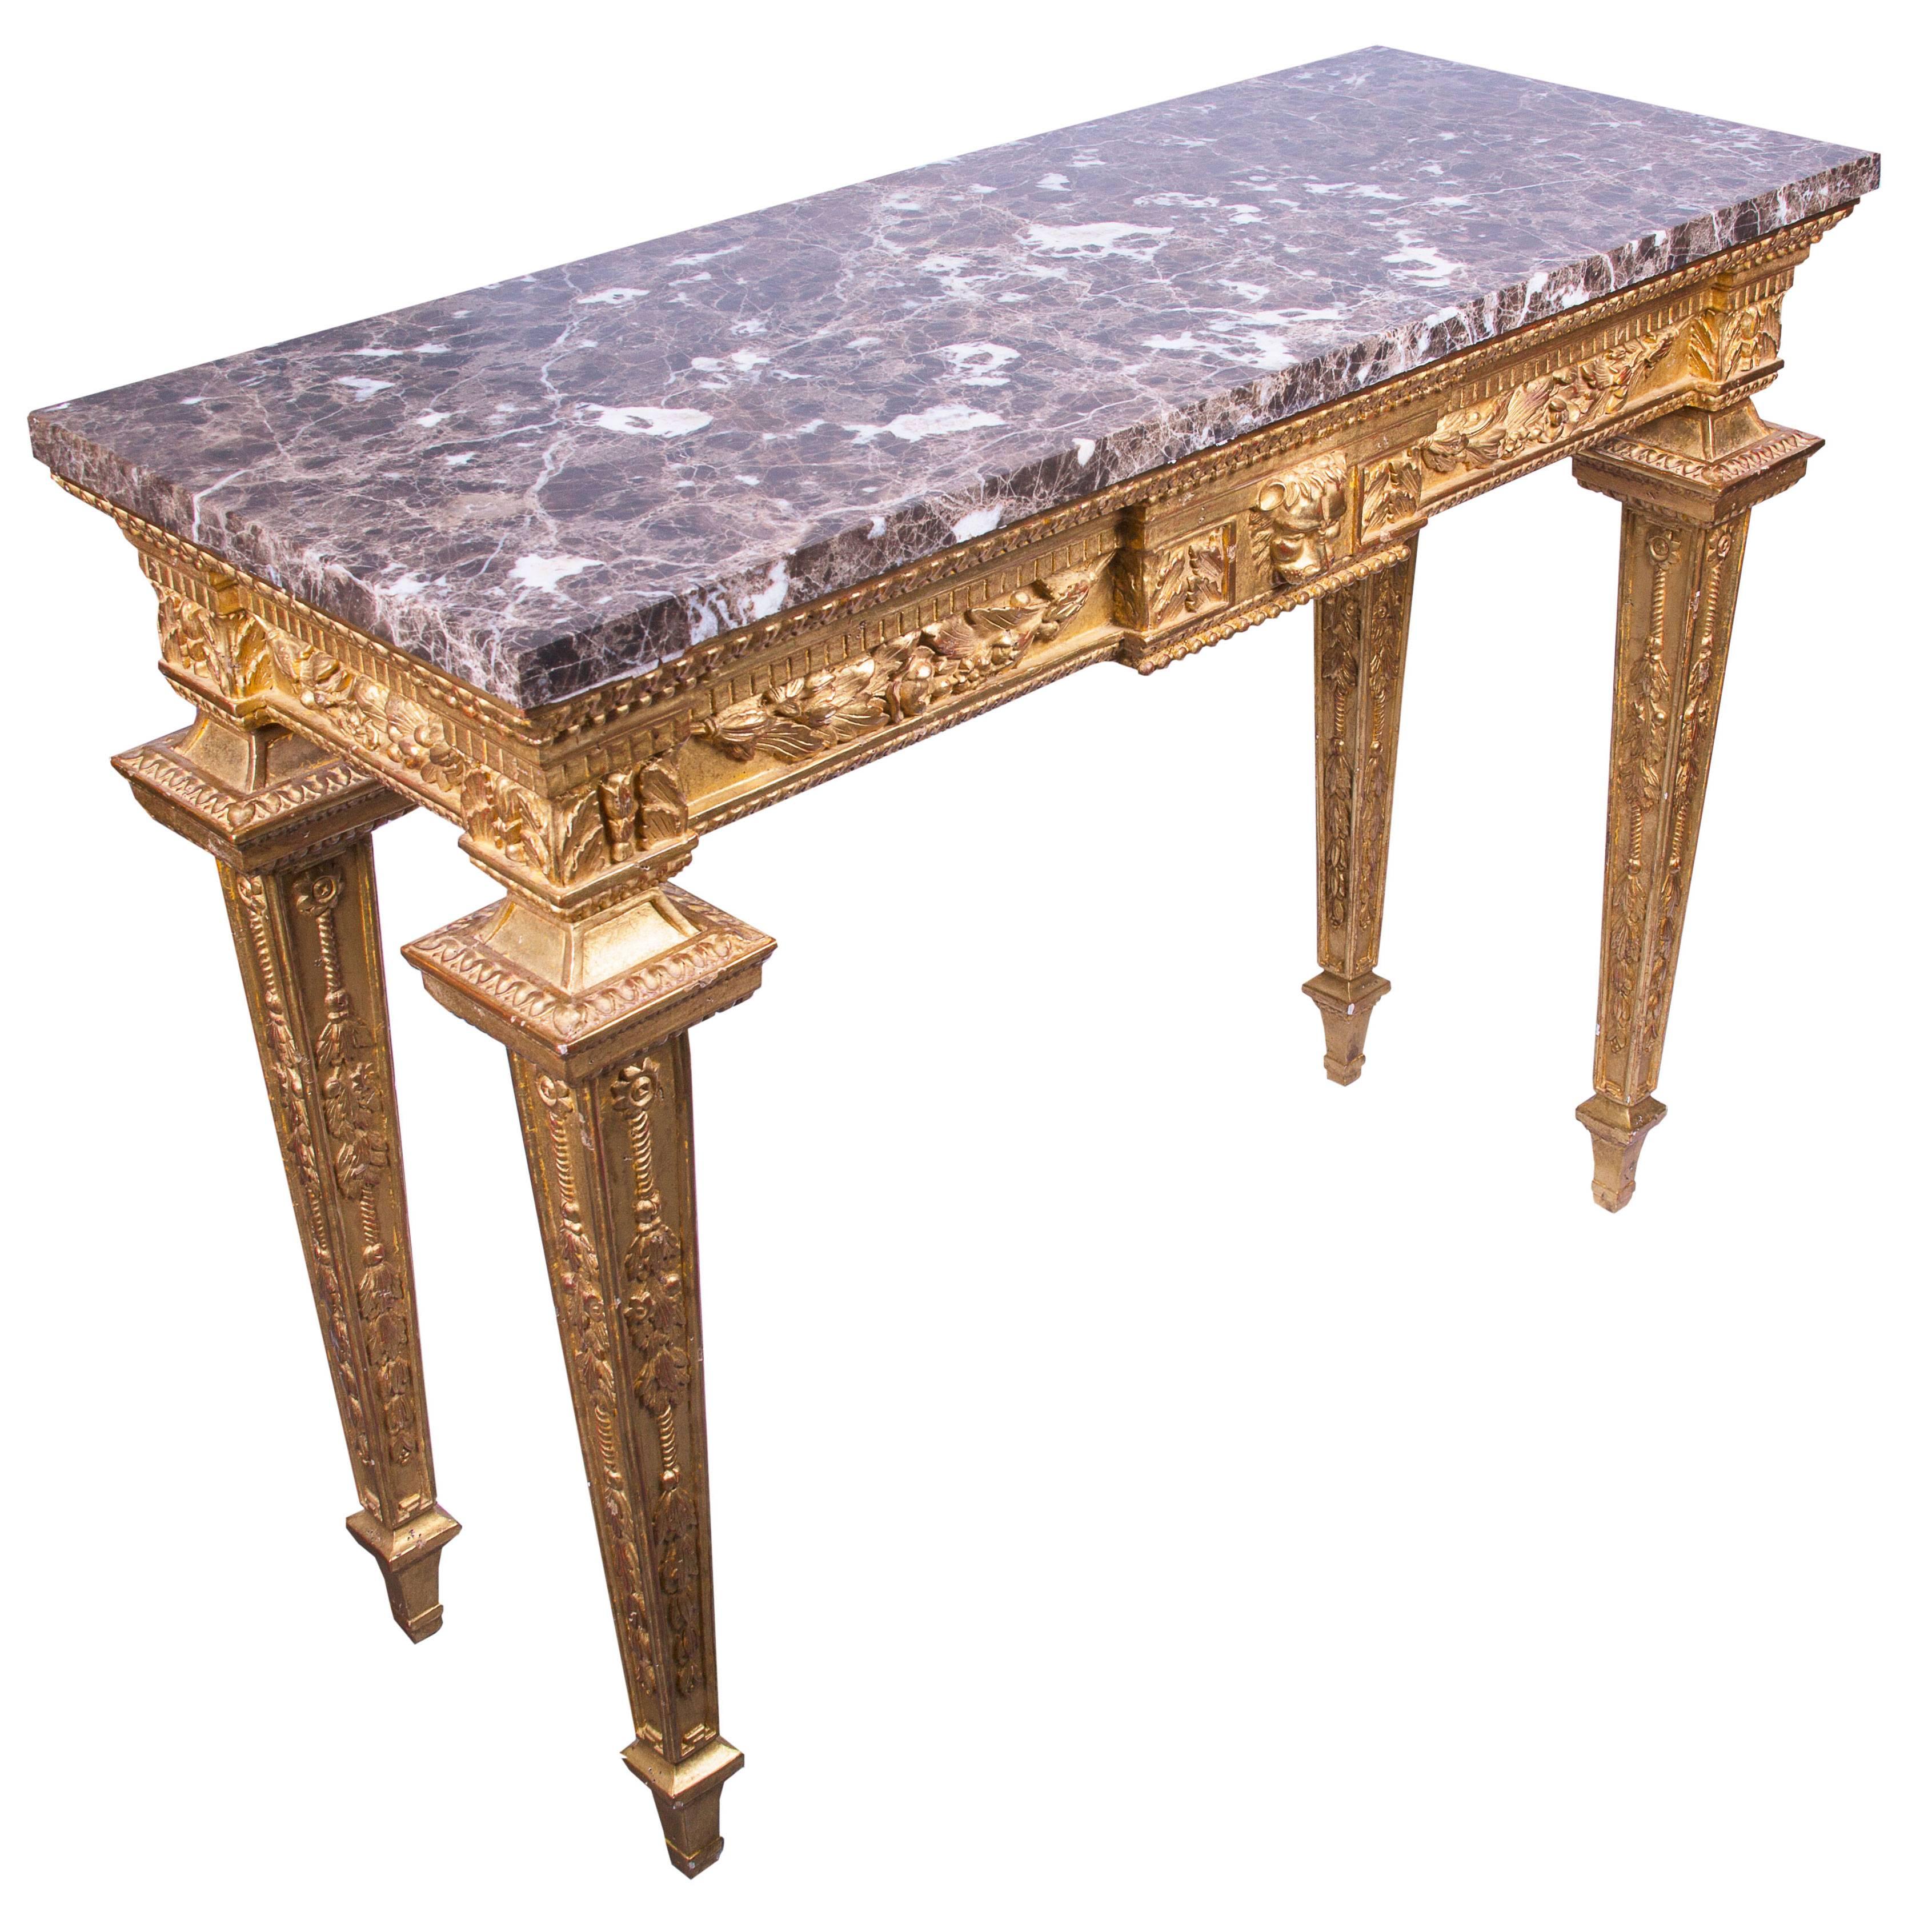 Louis XVI style giltwood console contains variegated marble top over frieze and straight tapered legs, all showing detail in relief form. Central lion mask flanked by swags, 20th century.